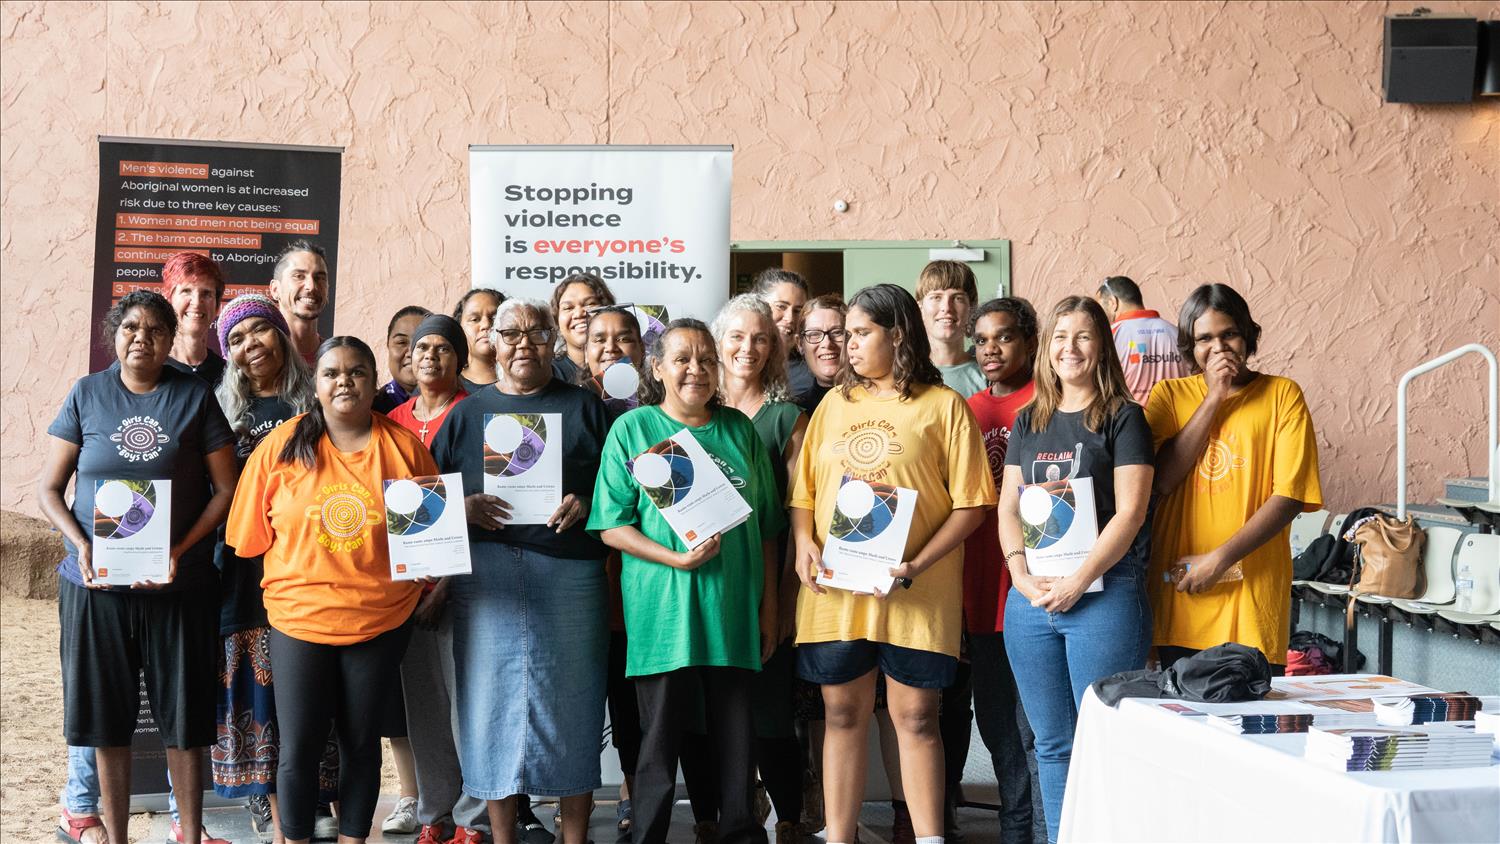 Safe, respected and free from violence: preventing violence against women in the Northern Territory